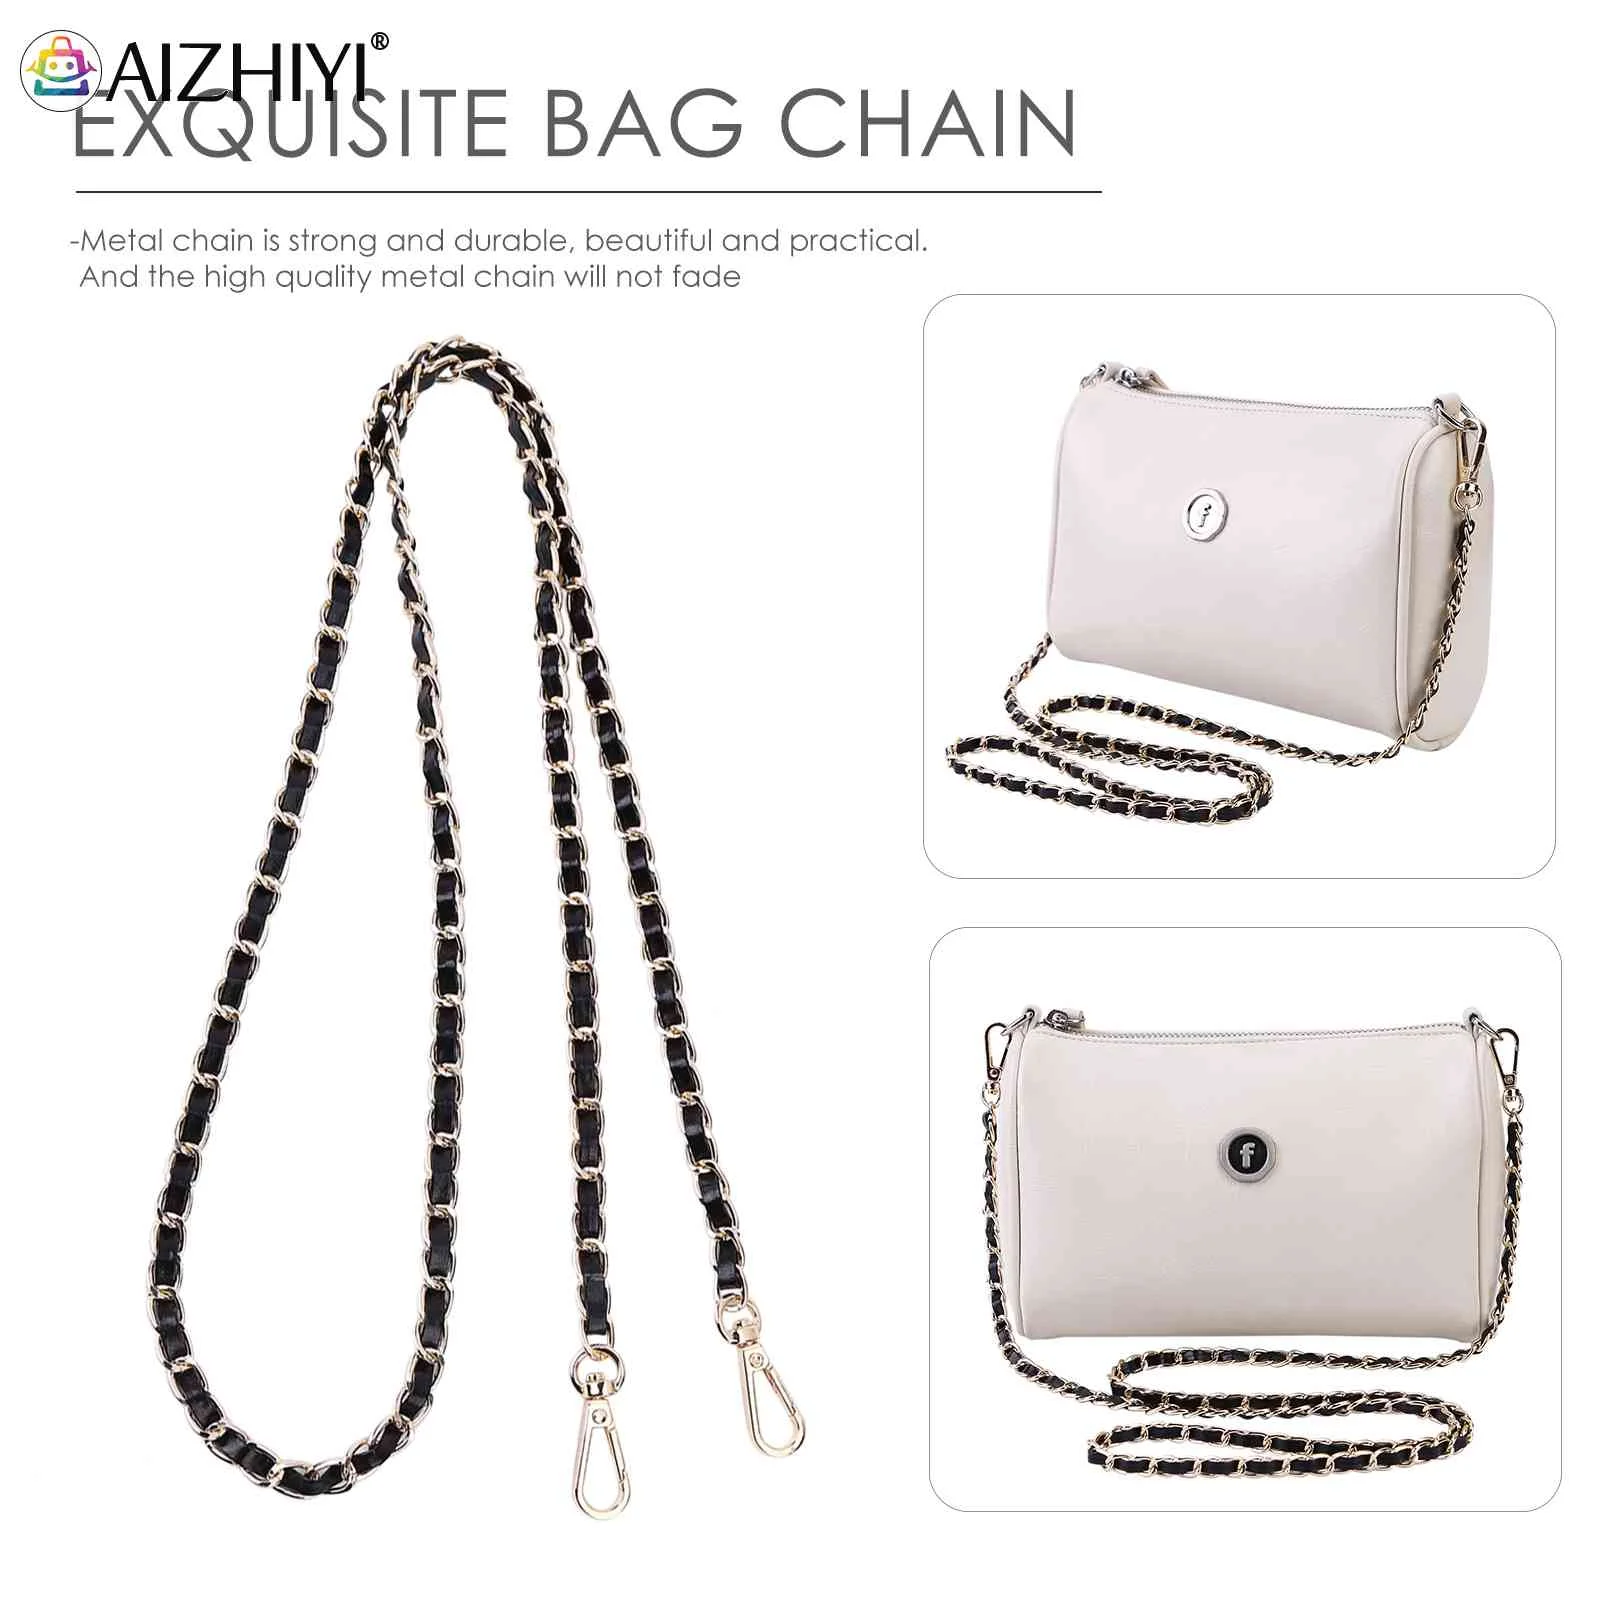 

DIY Purse Chain Strap - PU Leather Metal Chain Replacement for Shoulder Crossbody Bag Handbag 47 inches Long with Buckles 2Pcs